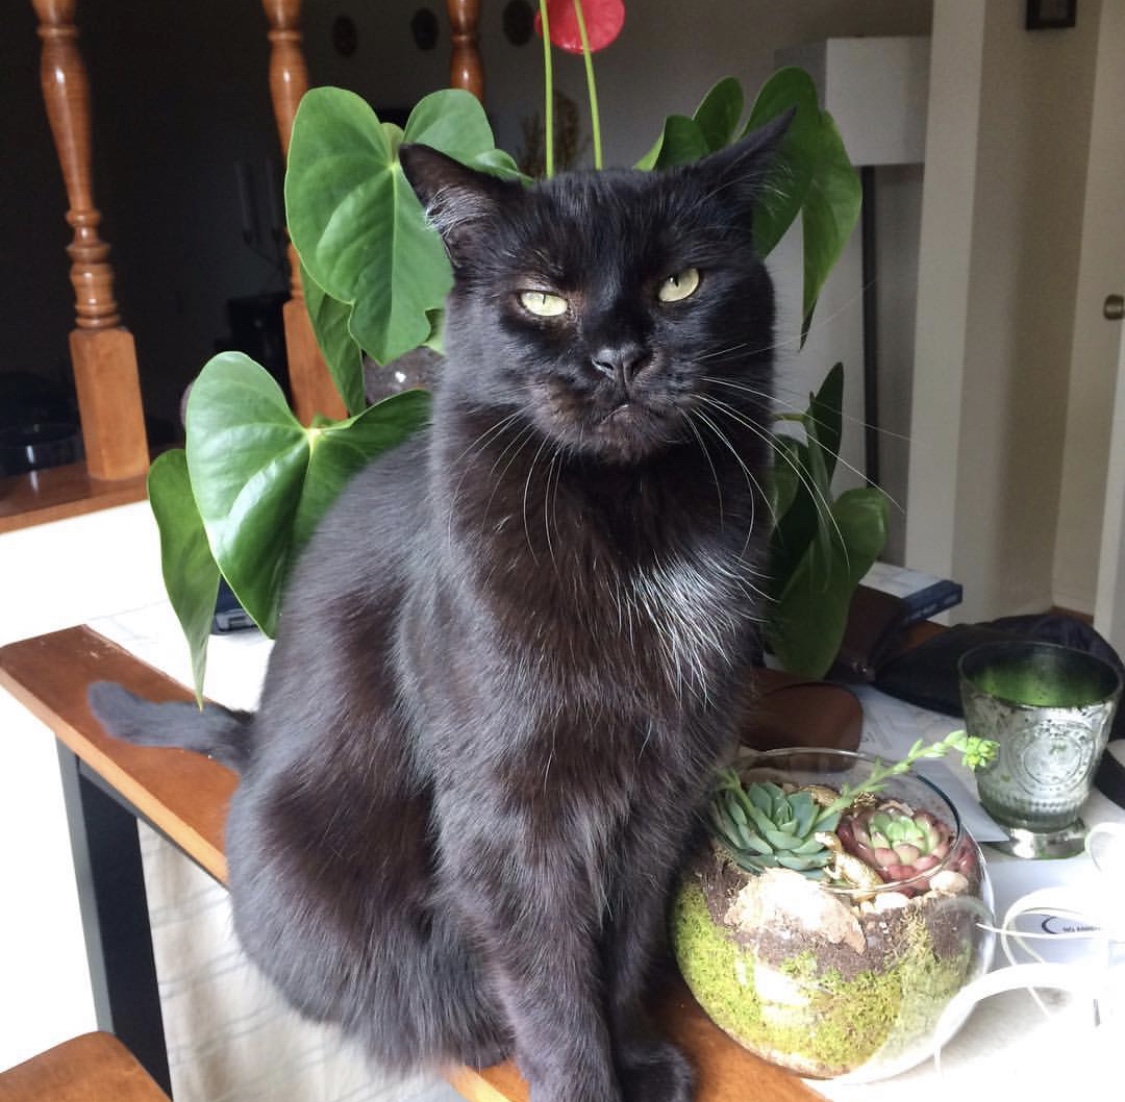 Image of Marley, Lost Cat